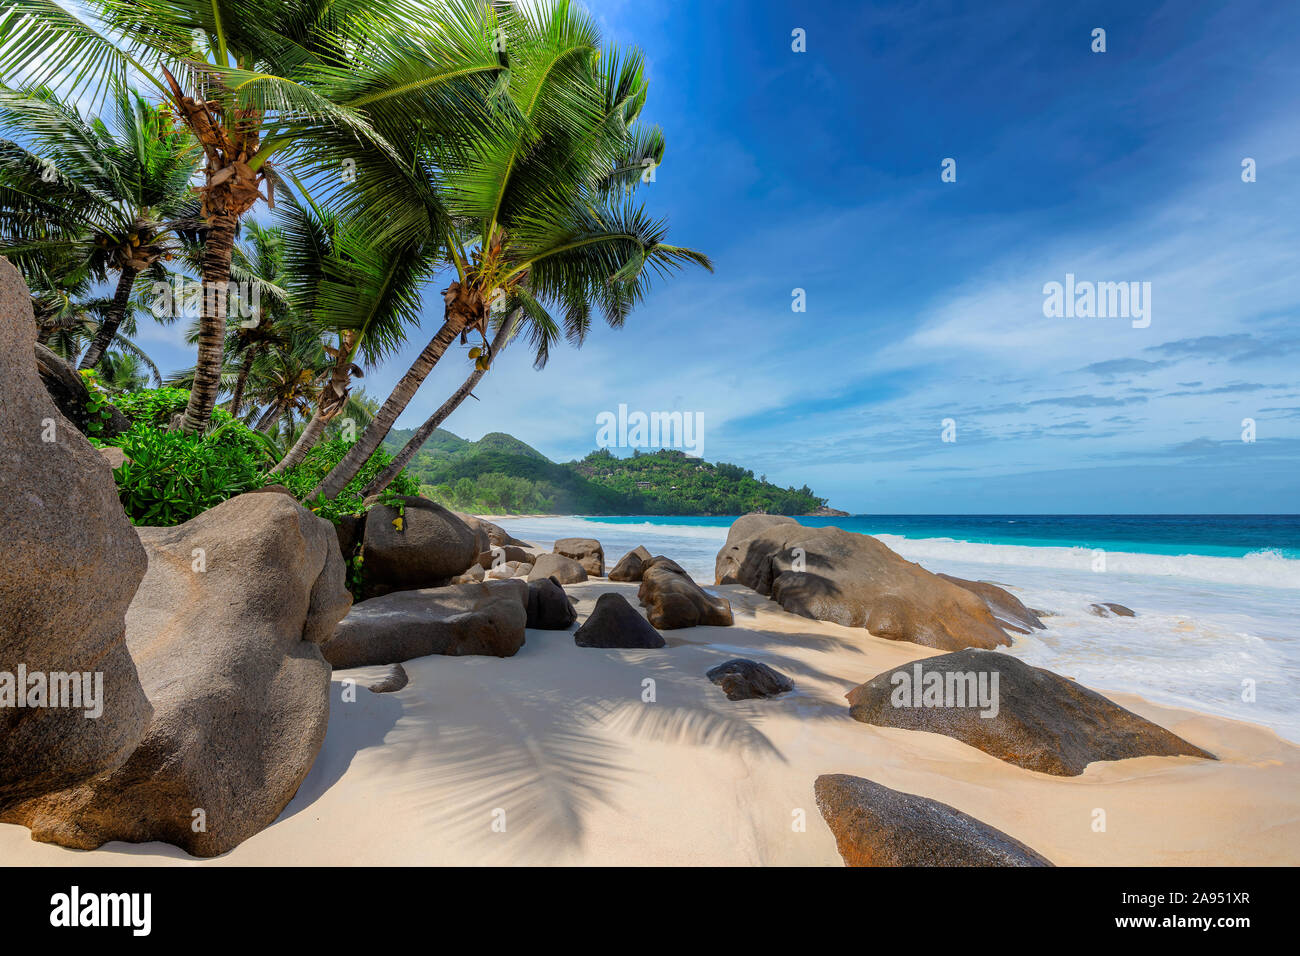 Coconut palm trees on exotic tropical beach in paradise island in blue ocean Stock Photo